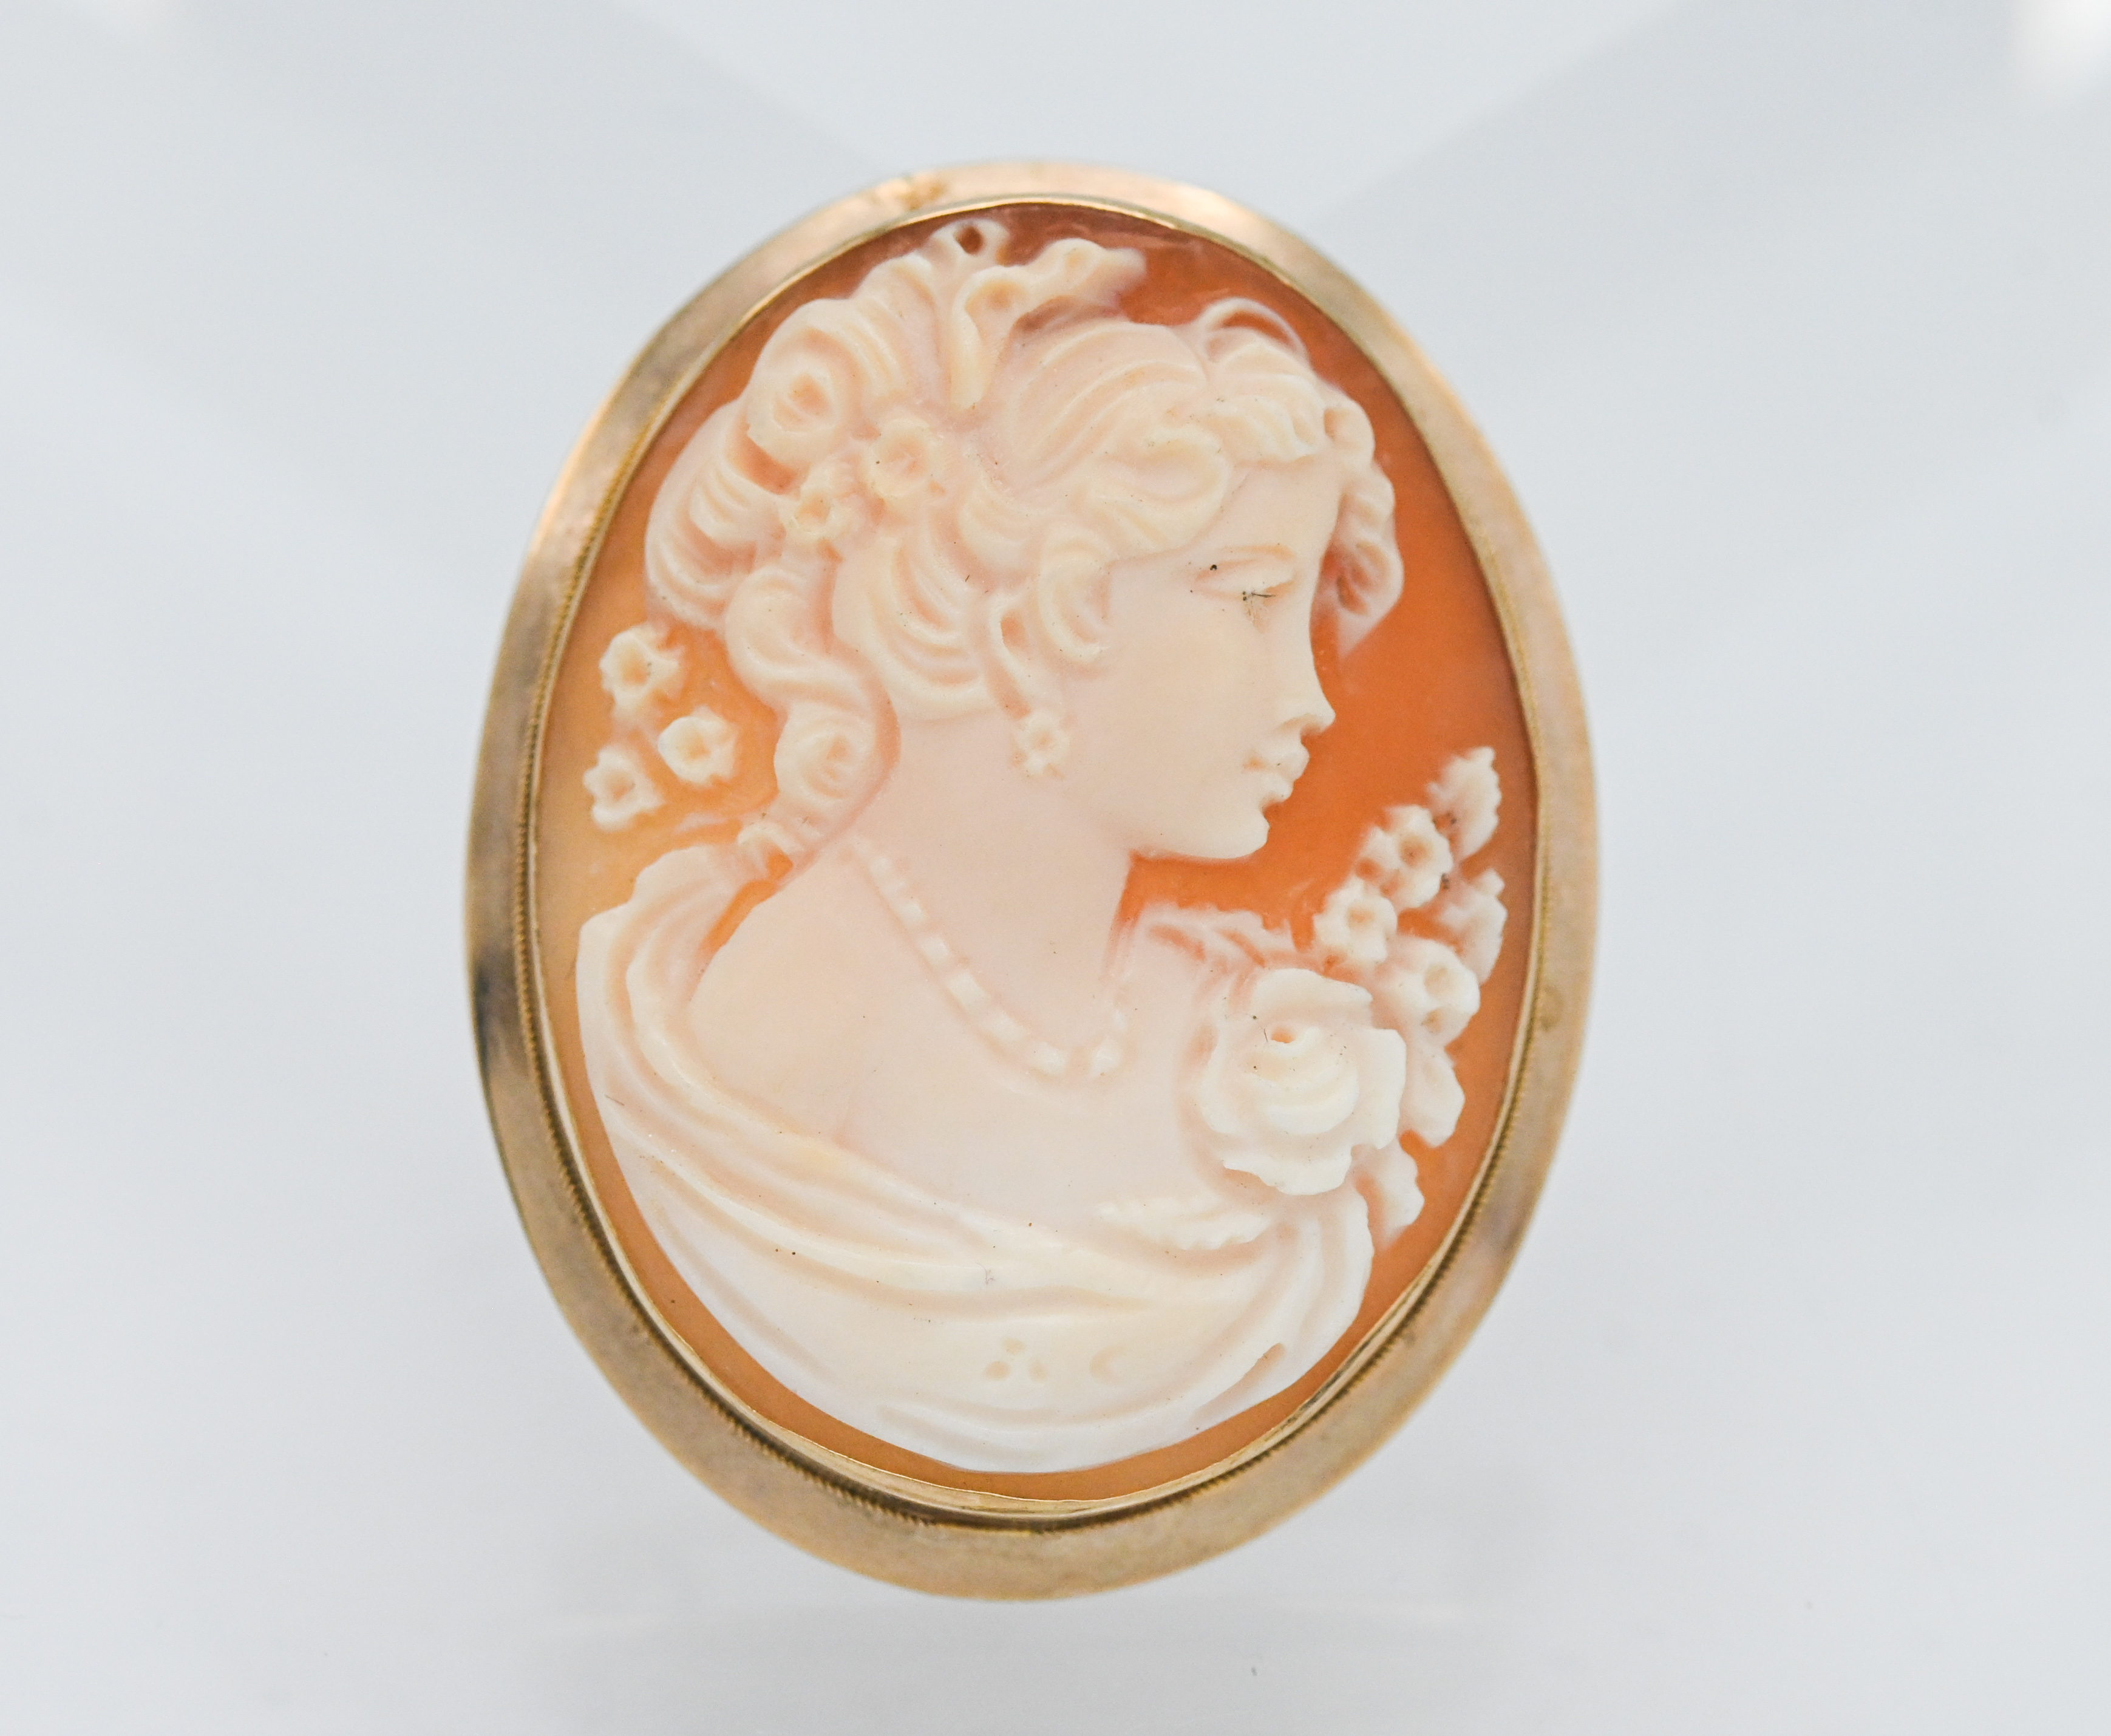 A 9 carat gold mounted cameo brooch